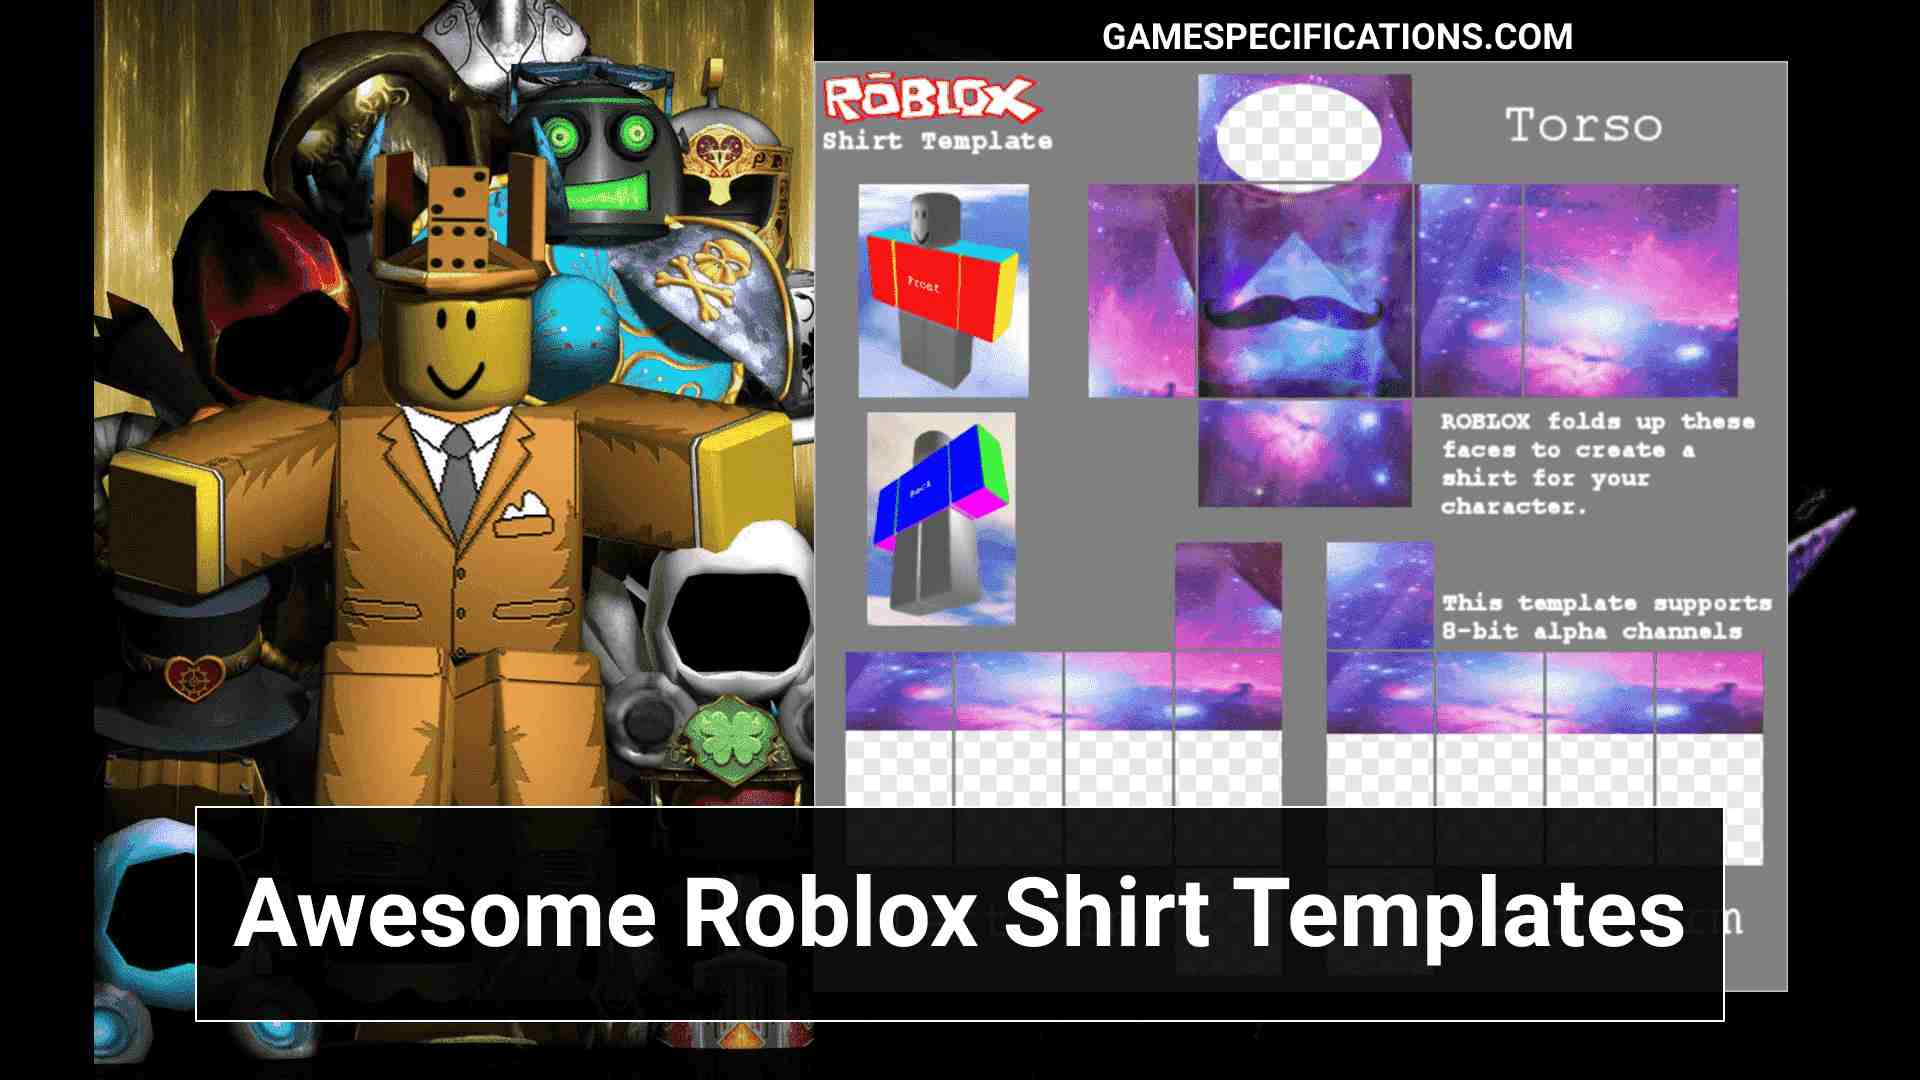 25 Coolest Roblox Shirt Templates Proved To Be The Best Game Specifications - how to make a custom shirt in roblox